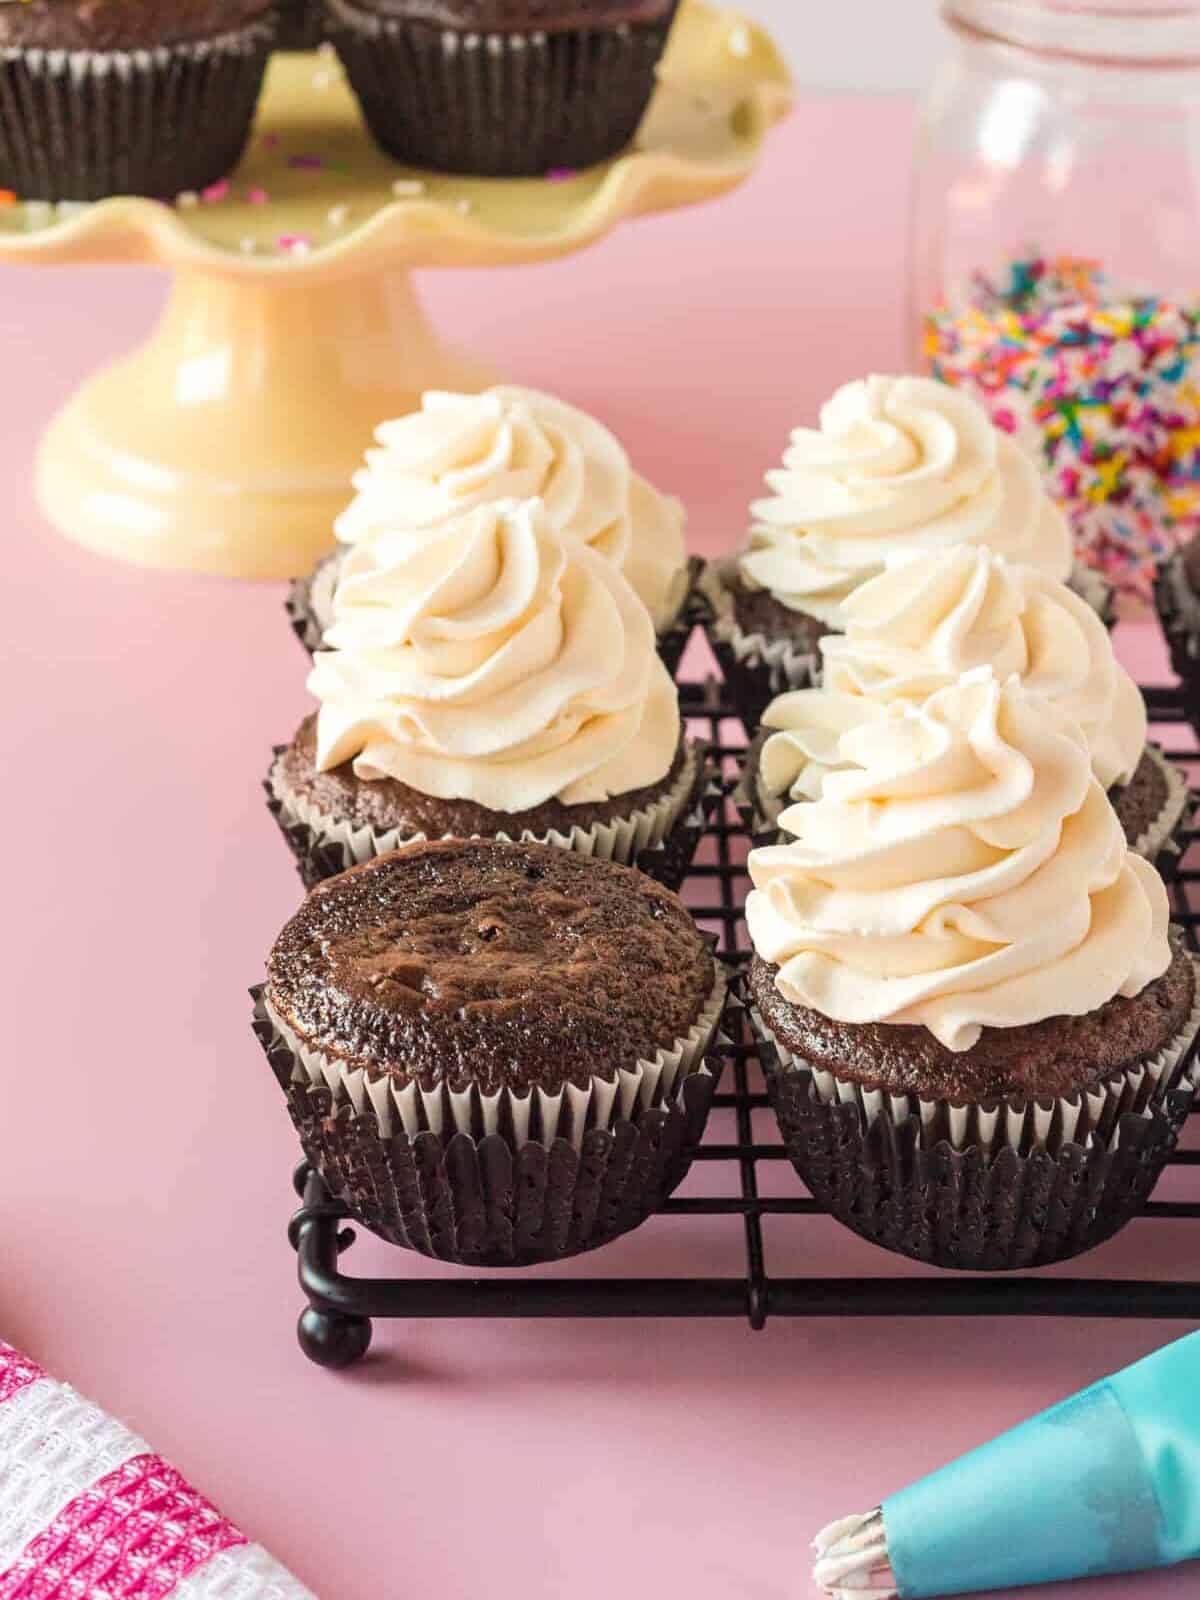 stabilized whipped cream on top of chocolate cupcakes